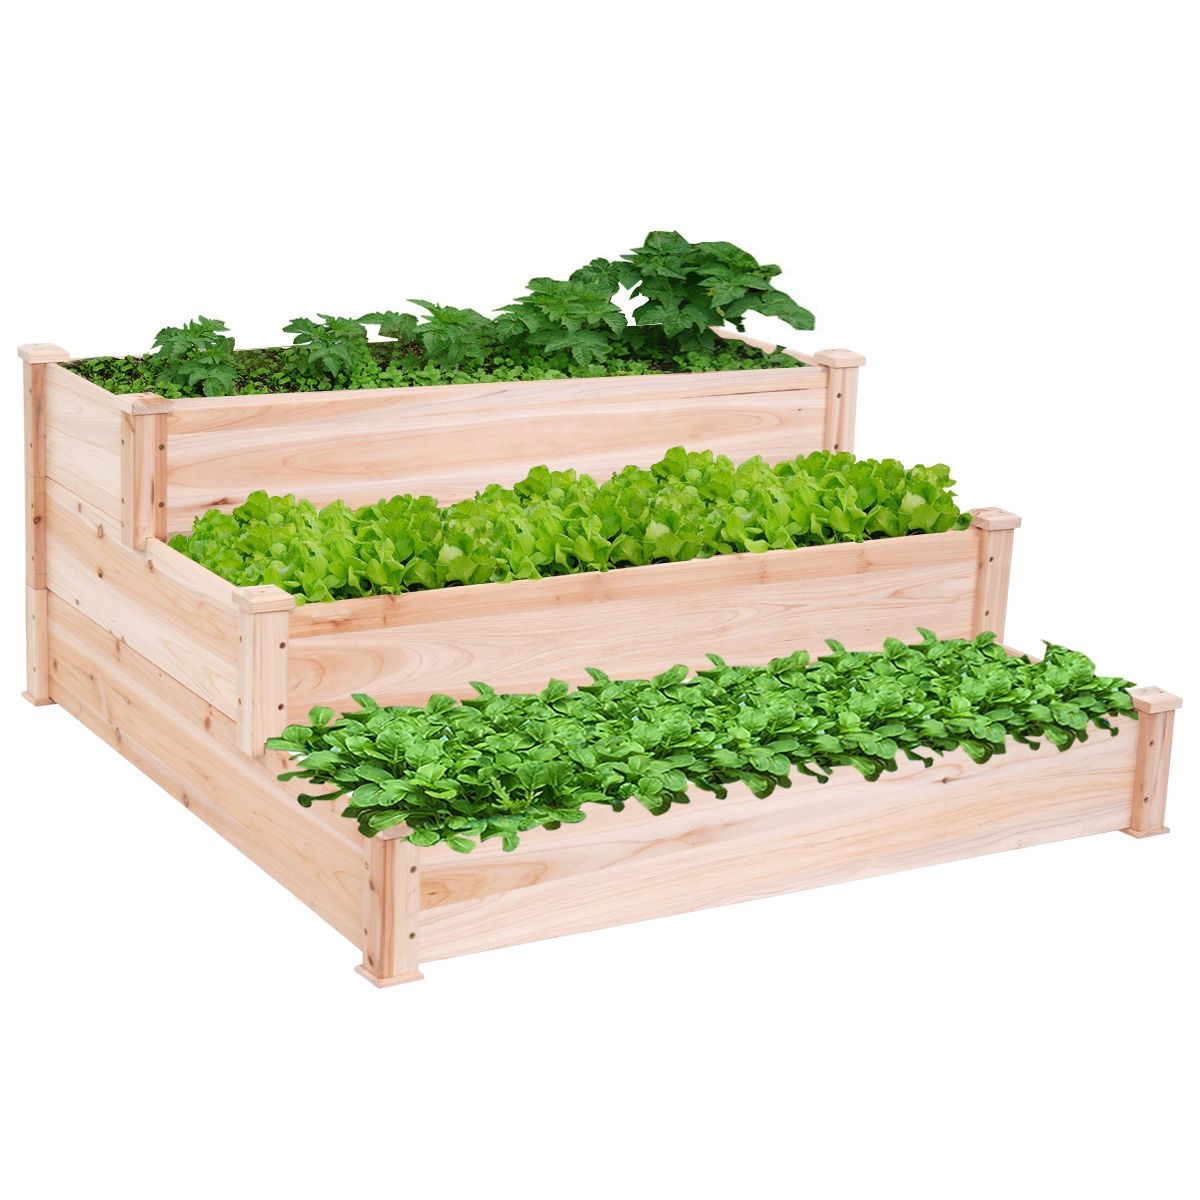 Best ideas about Elevated Garden Planter
. Save or Pin Outdoor Wooden Raised Ve able Garden Bed 3 Tier Elevated Now.